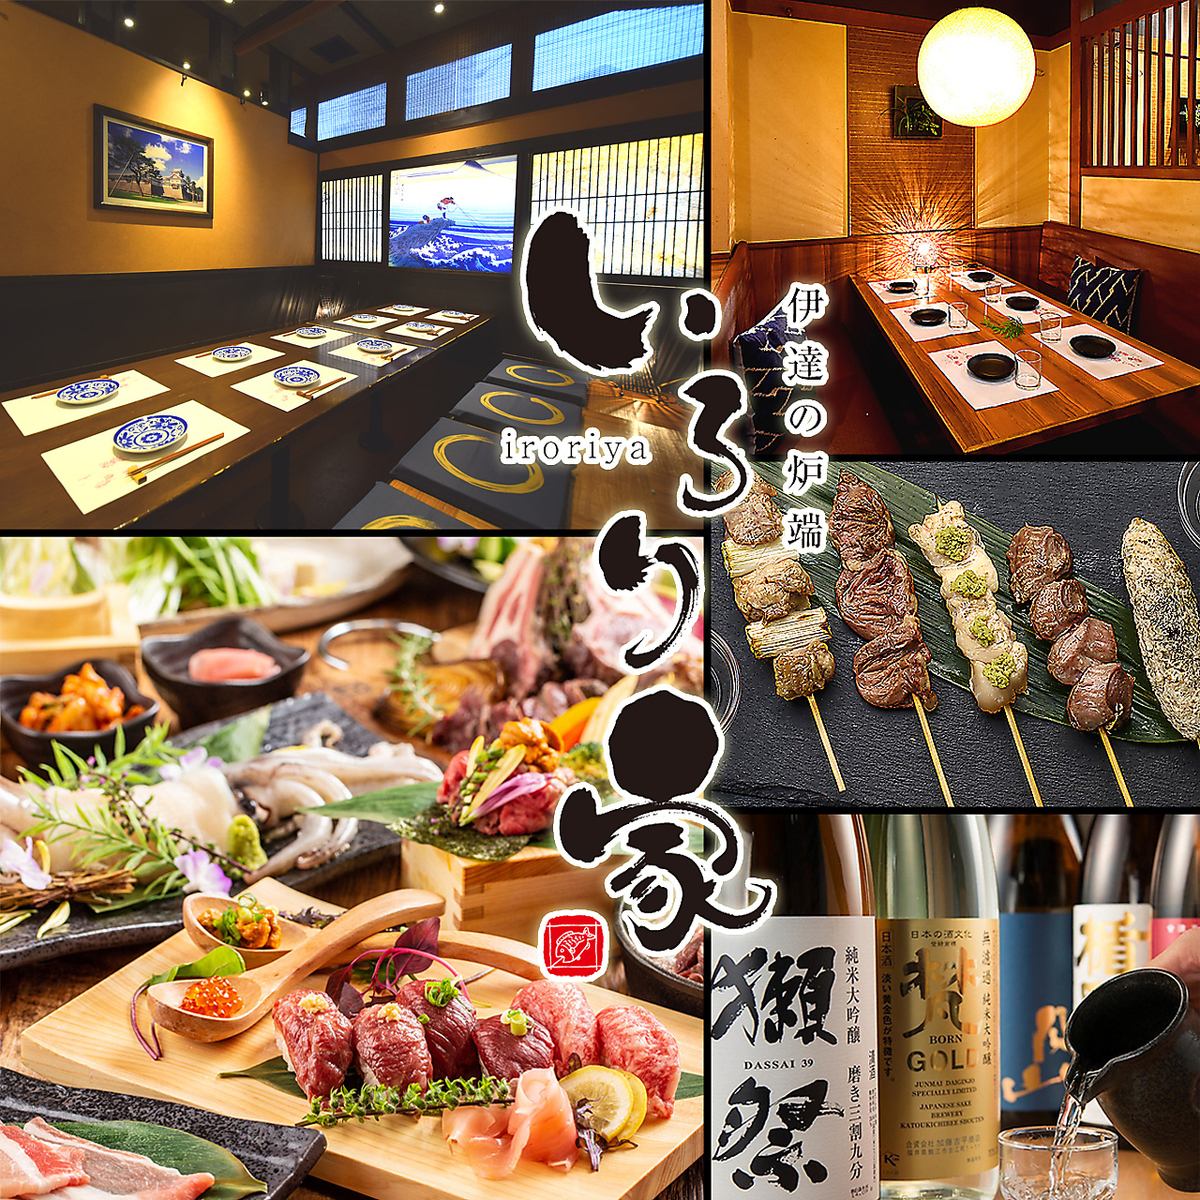 [Near Sendai Station] Sendai Beef ◎ Great for banquets and drinking parties! Various courses with all-you-can-drink options available! Private room izakaya